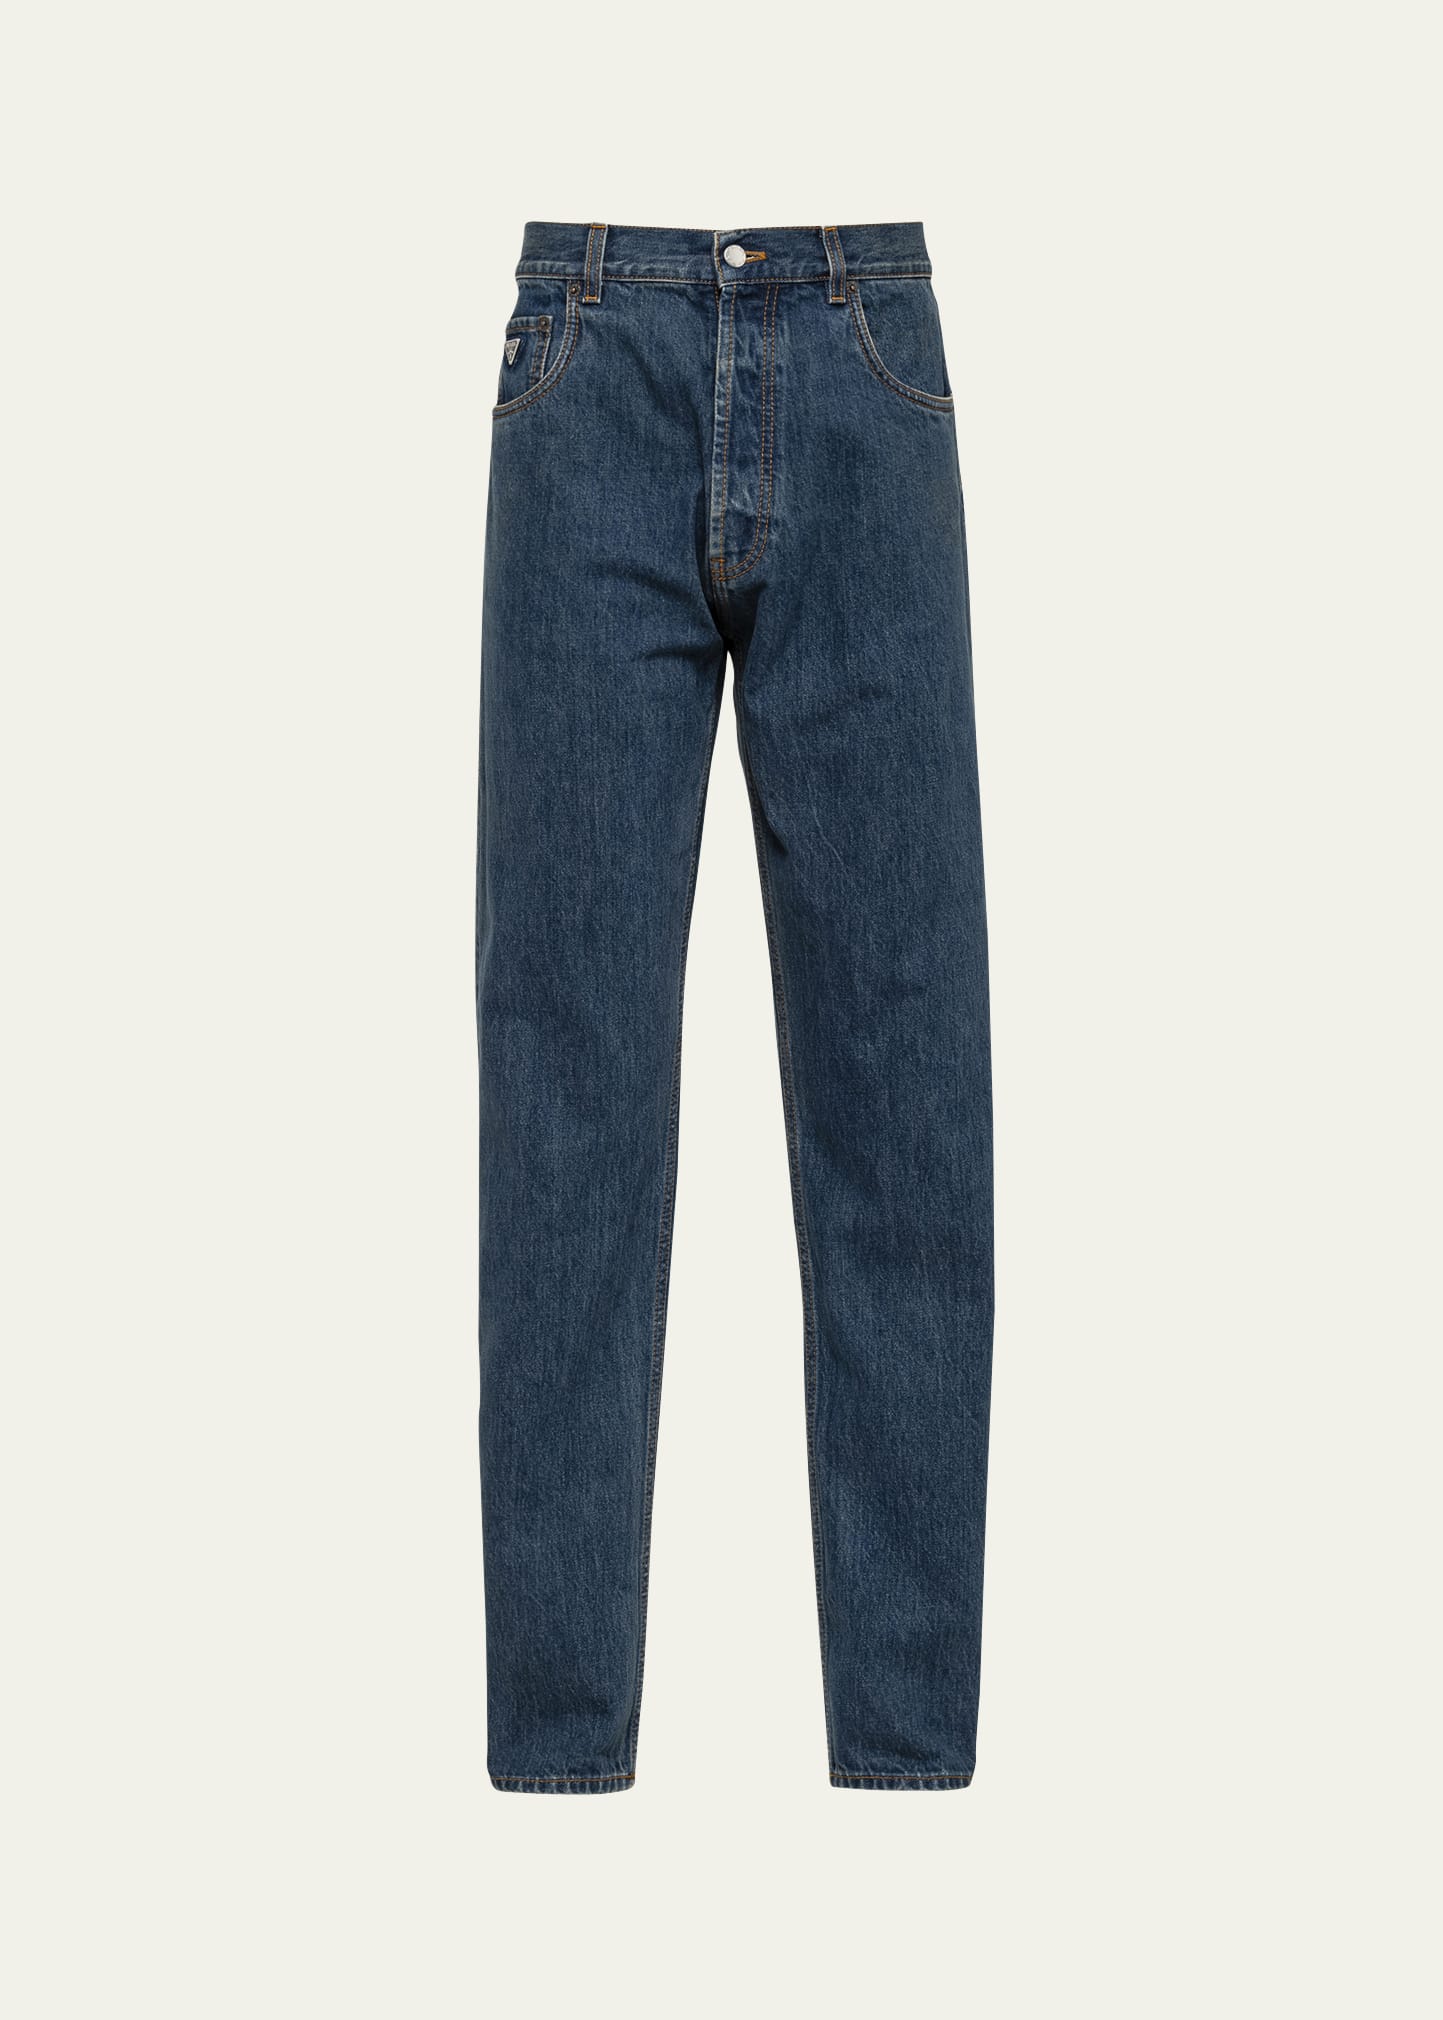 Men's Relaxed Used-Look Jeans